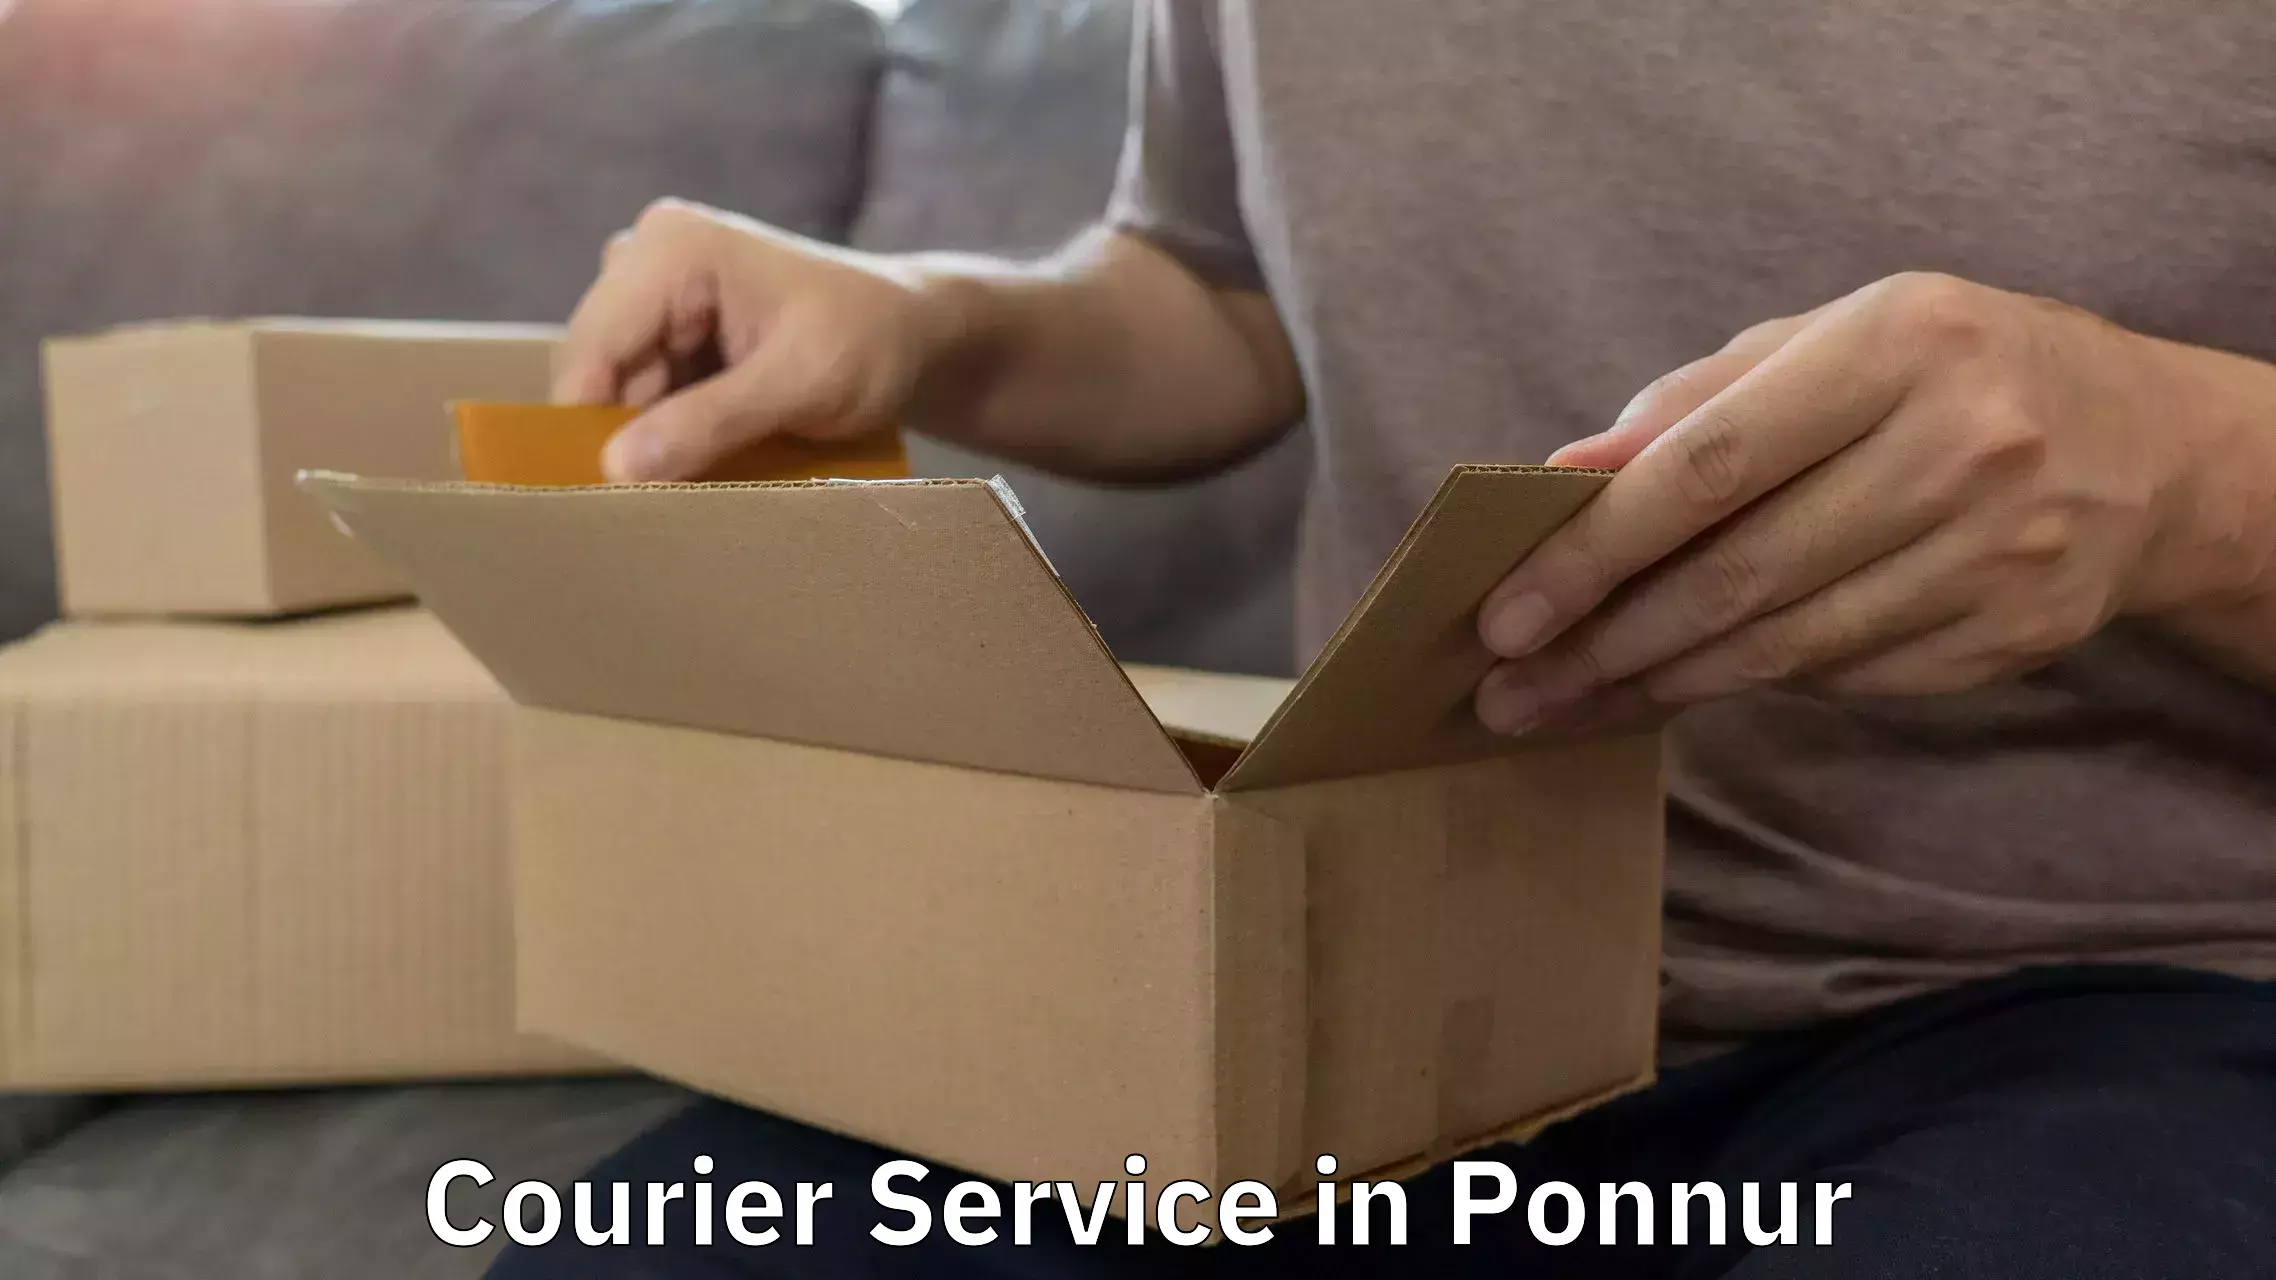 Parcel delivery automation in Ponnur